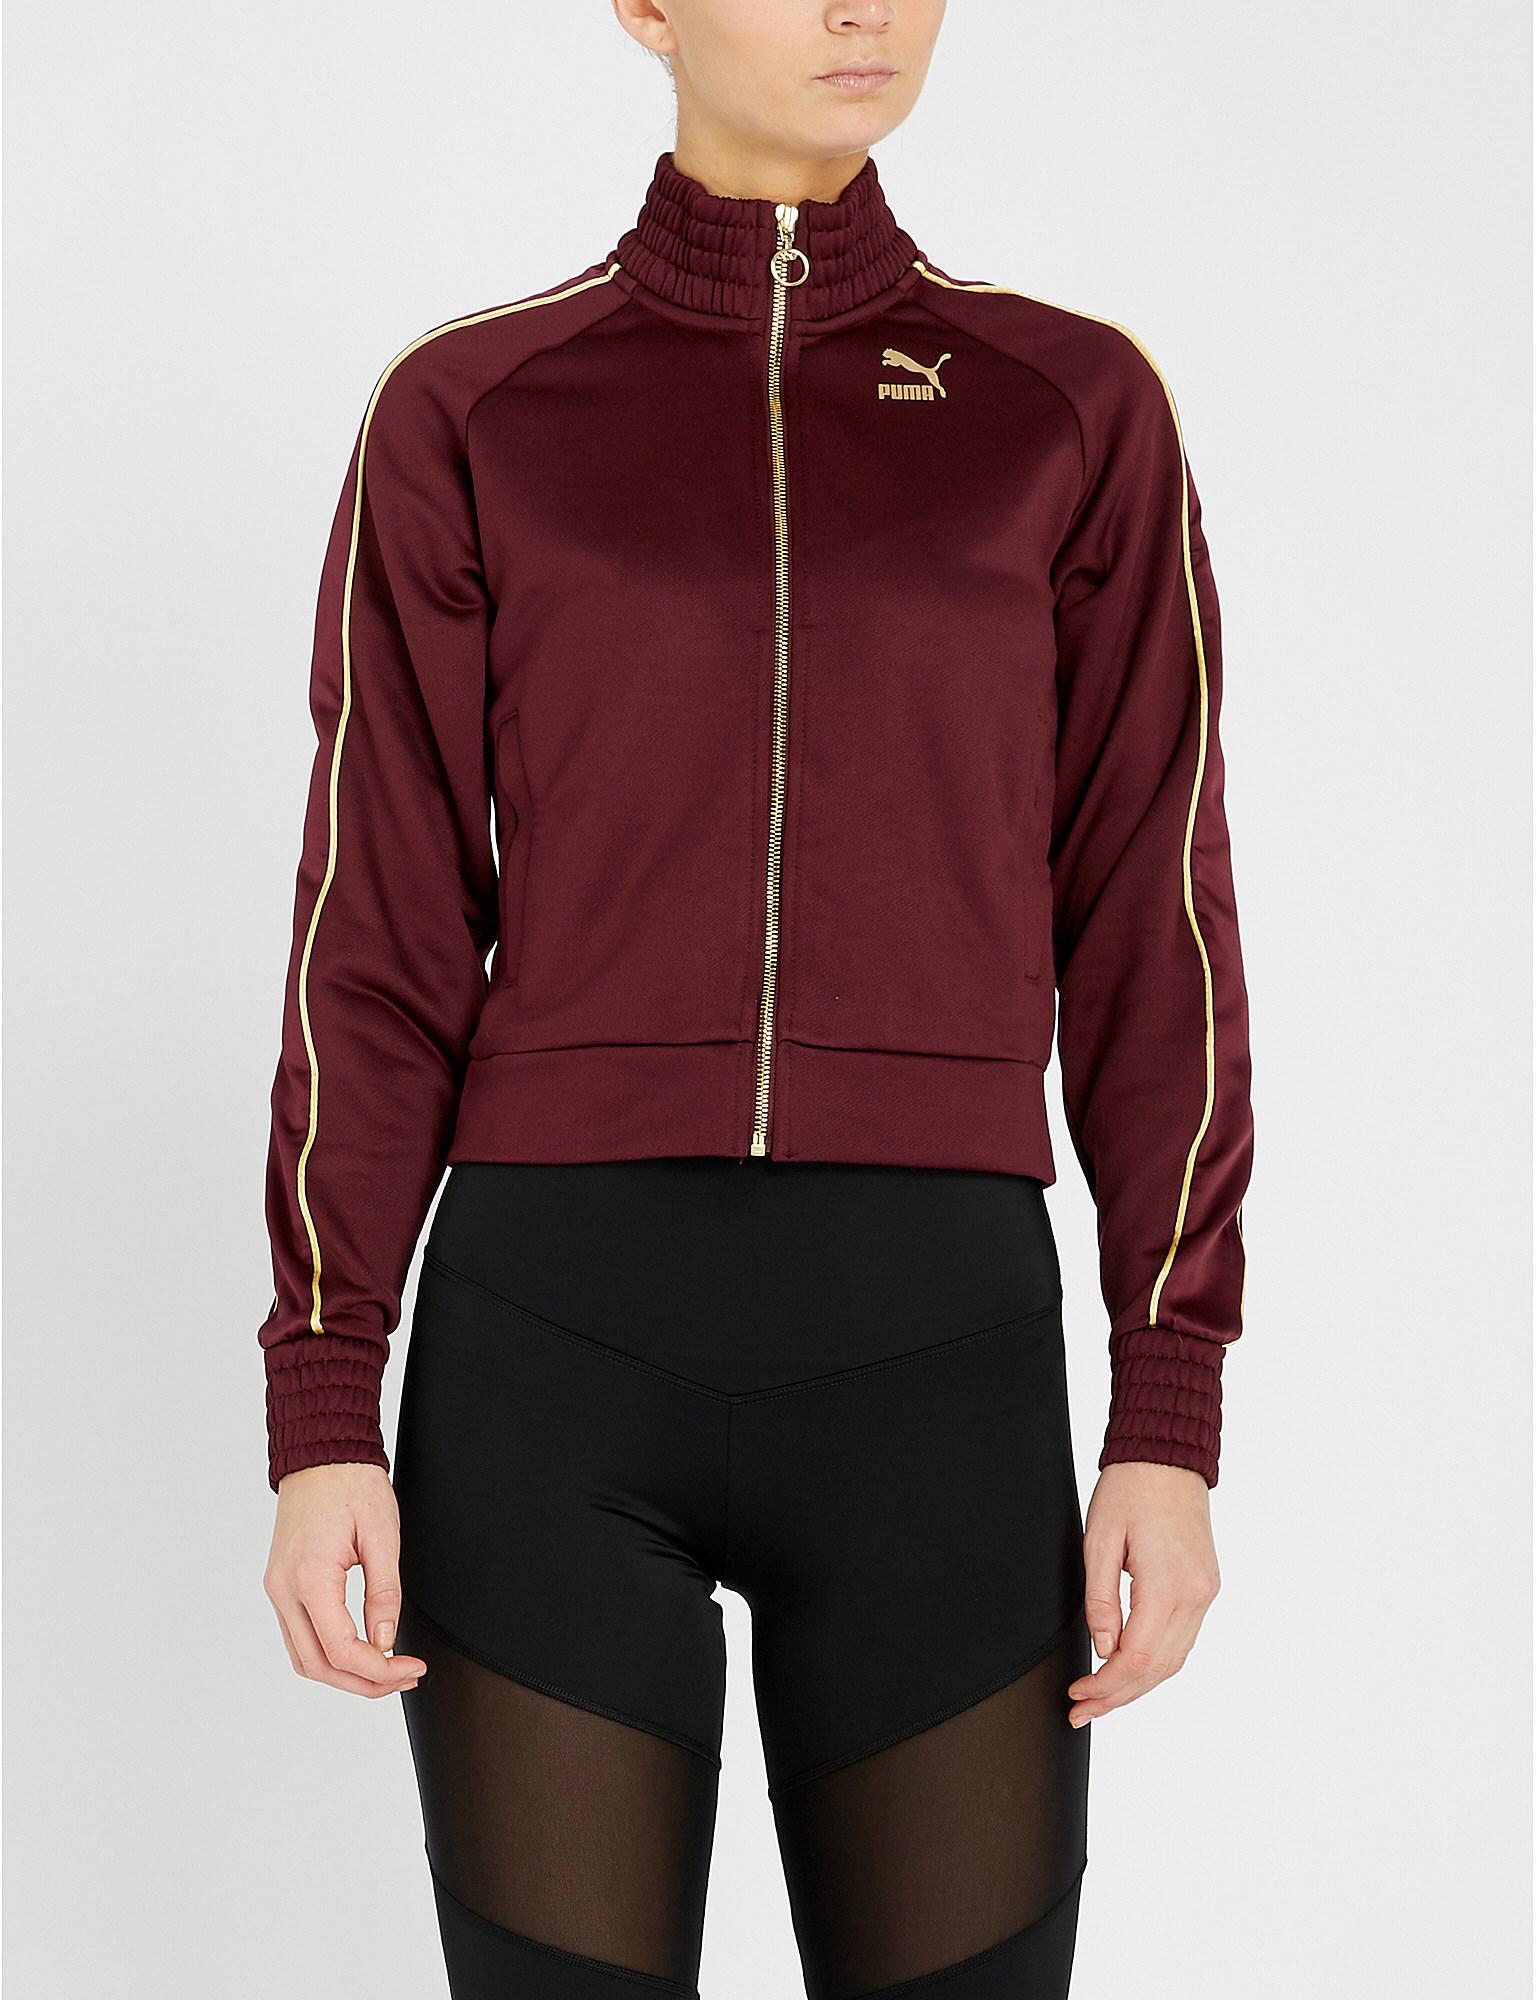 PUMA Synthetic X Kenza Zip-up Jersey Jacket in Red - Lyst